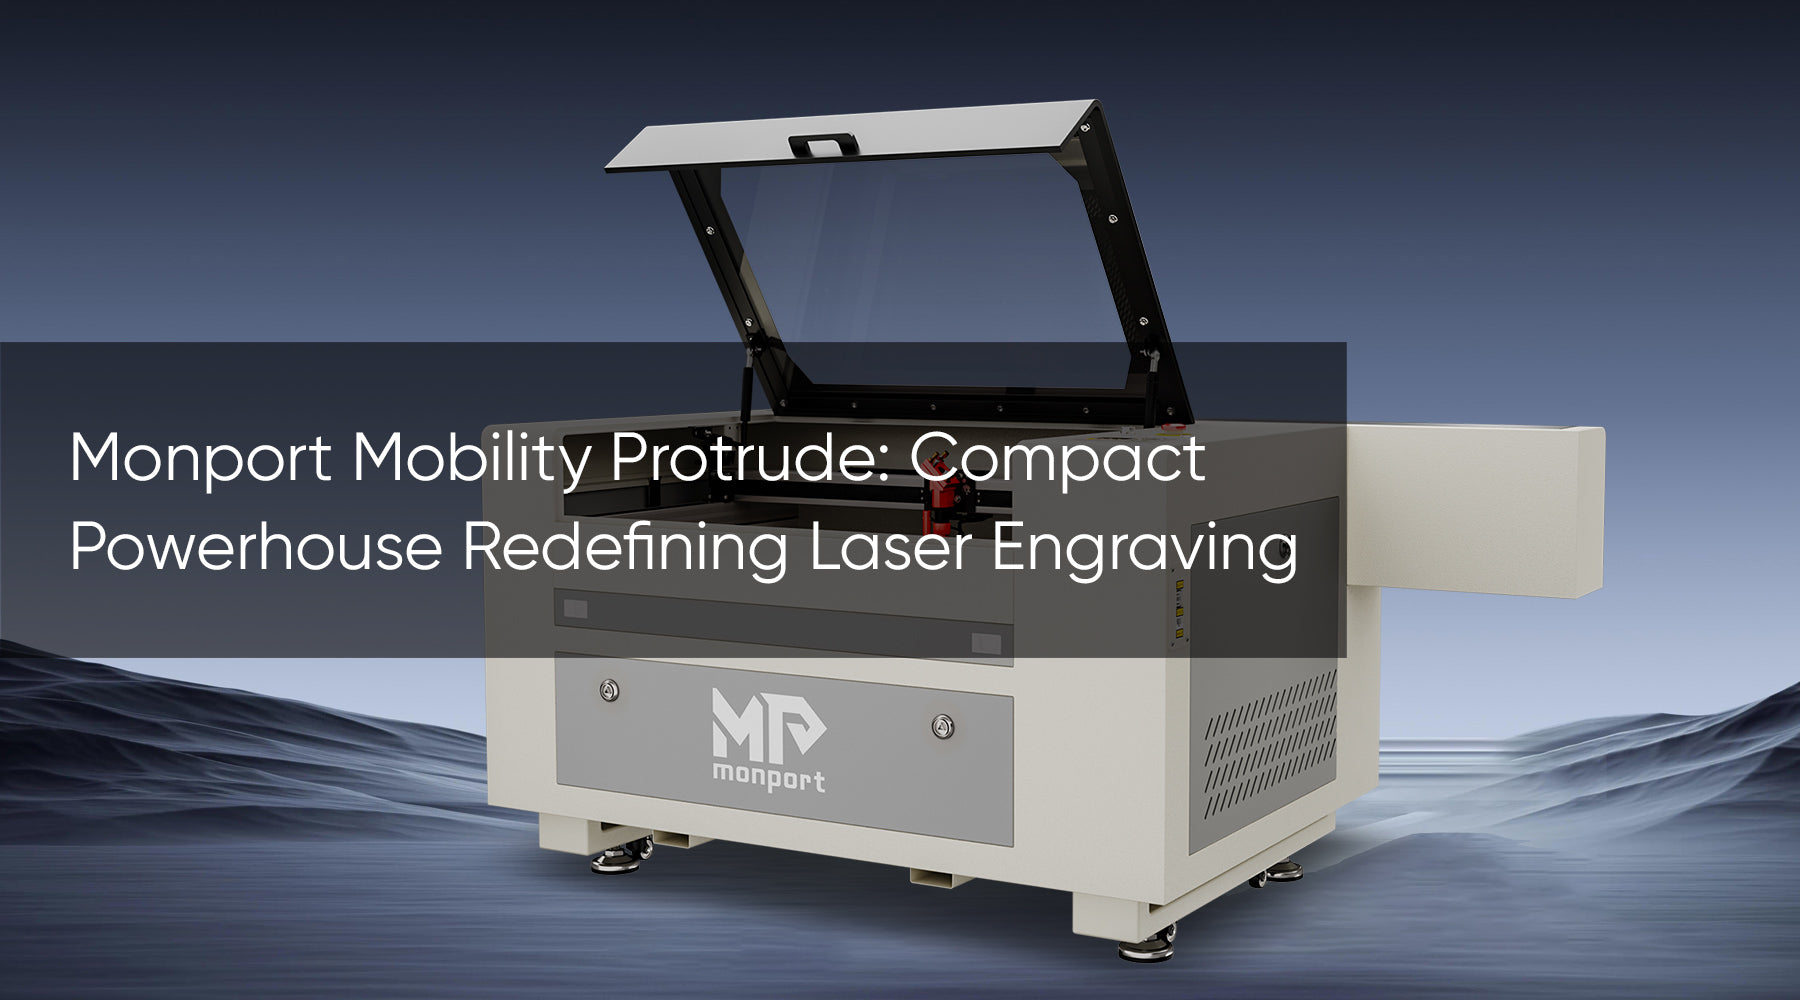 Monport Mobility Protrude: Compact Powerhouse Redefining Laser Engraving